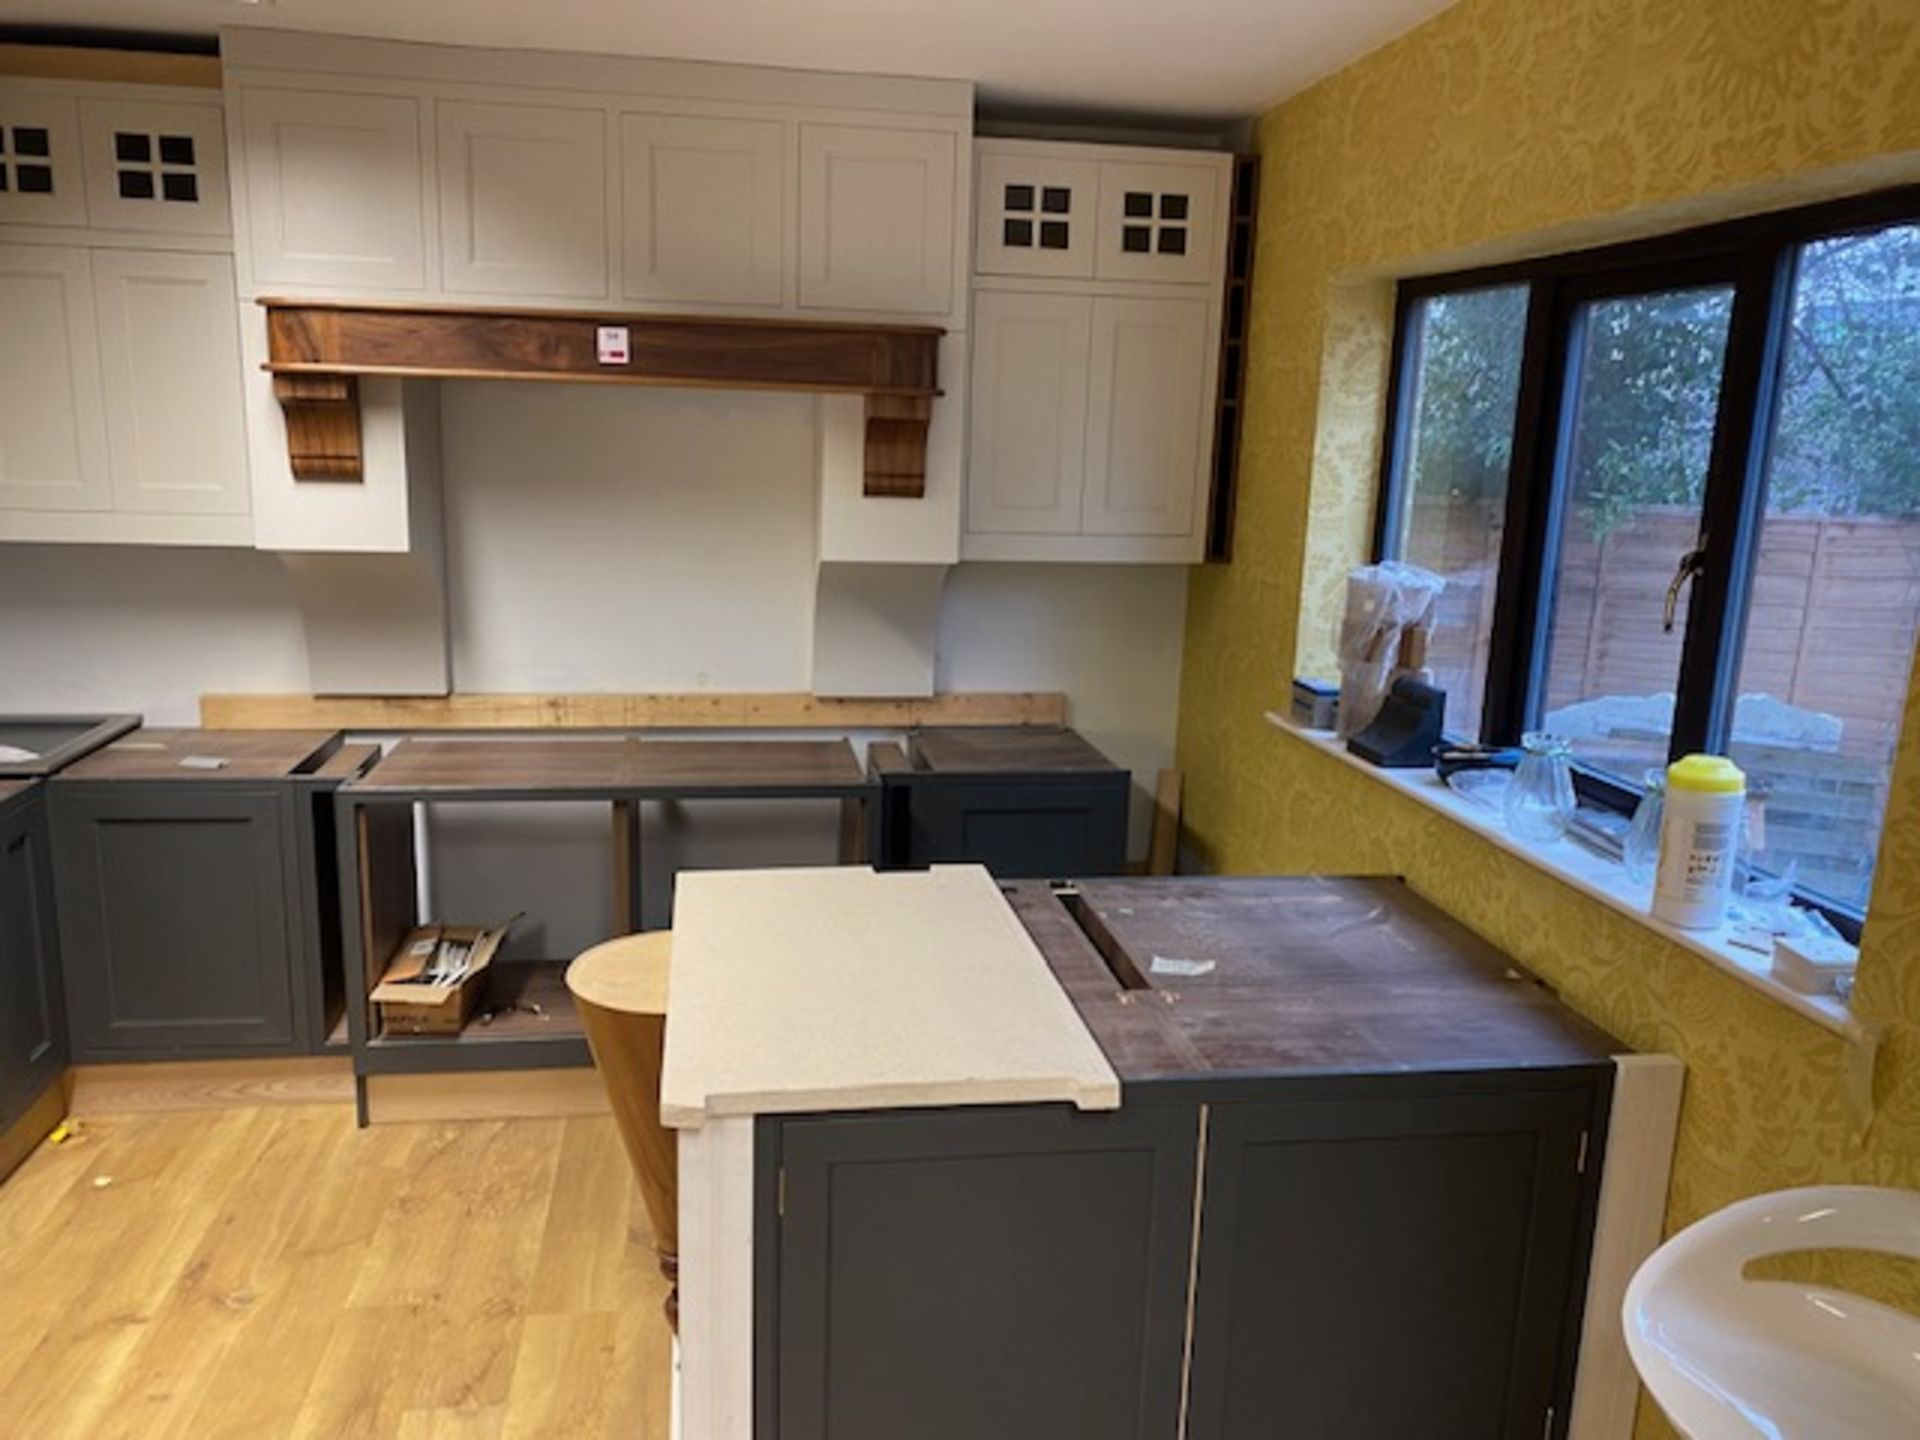 Part built display kitchen (as lotted, please note that appliances are not included) - Image 2 of 9